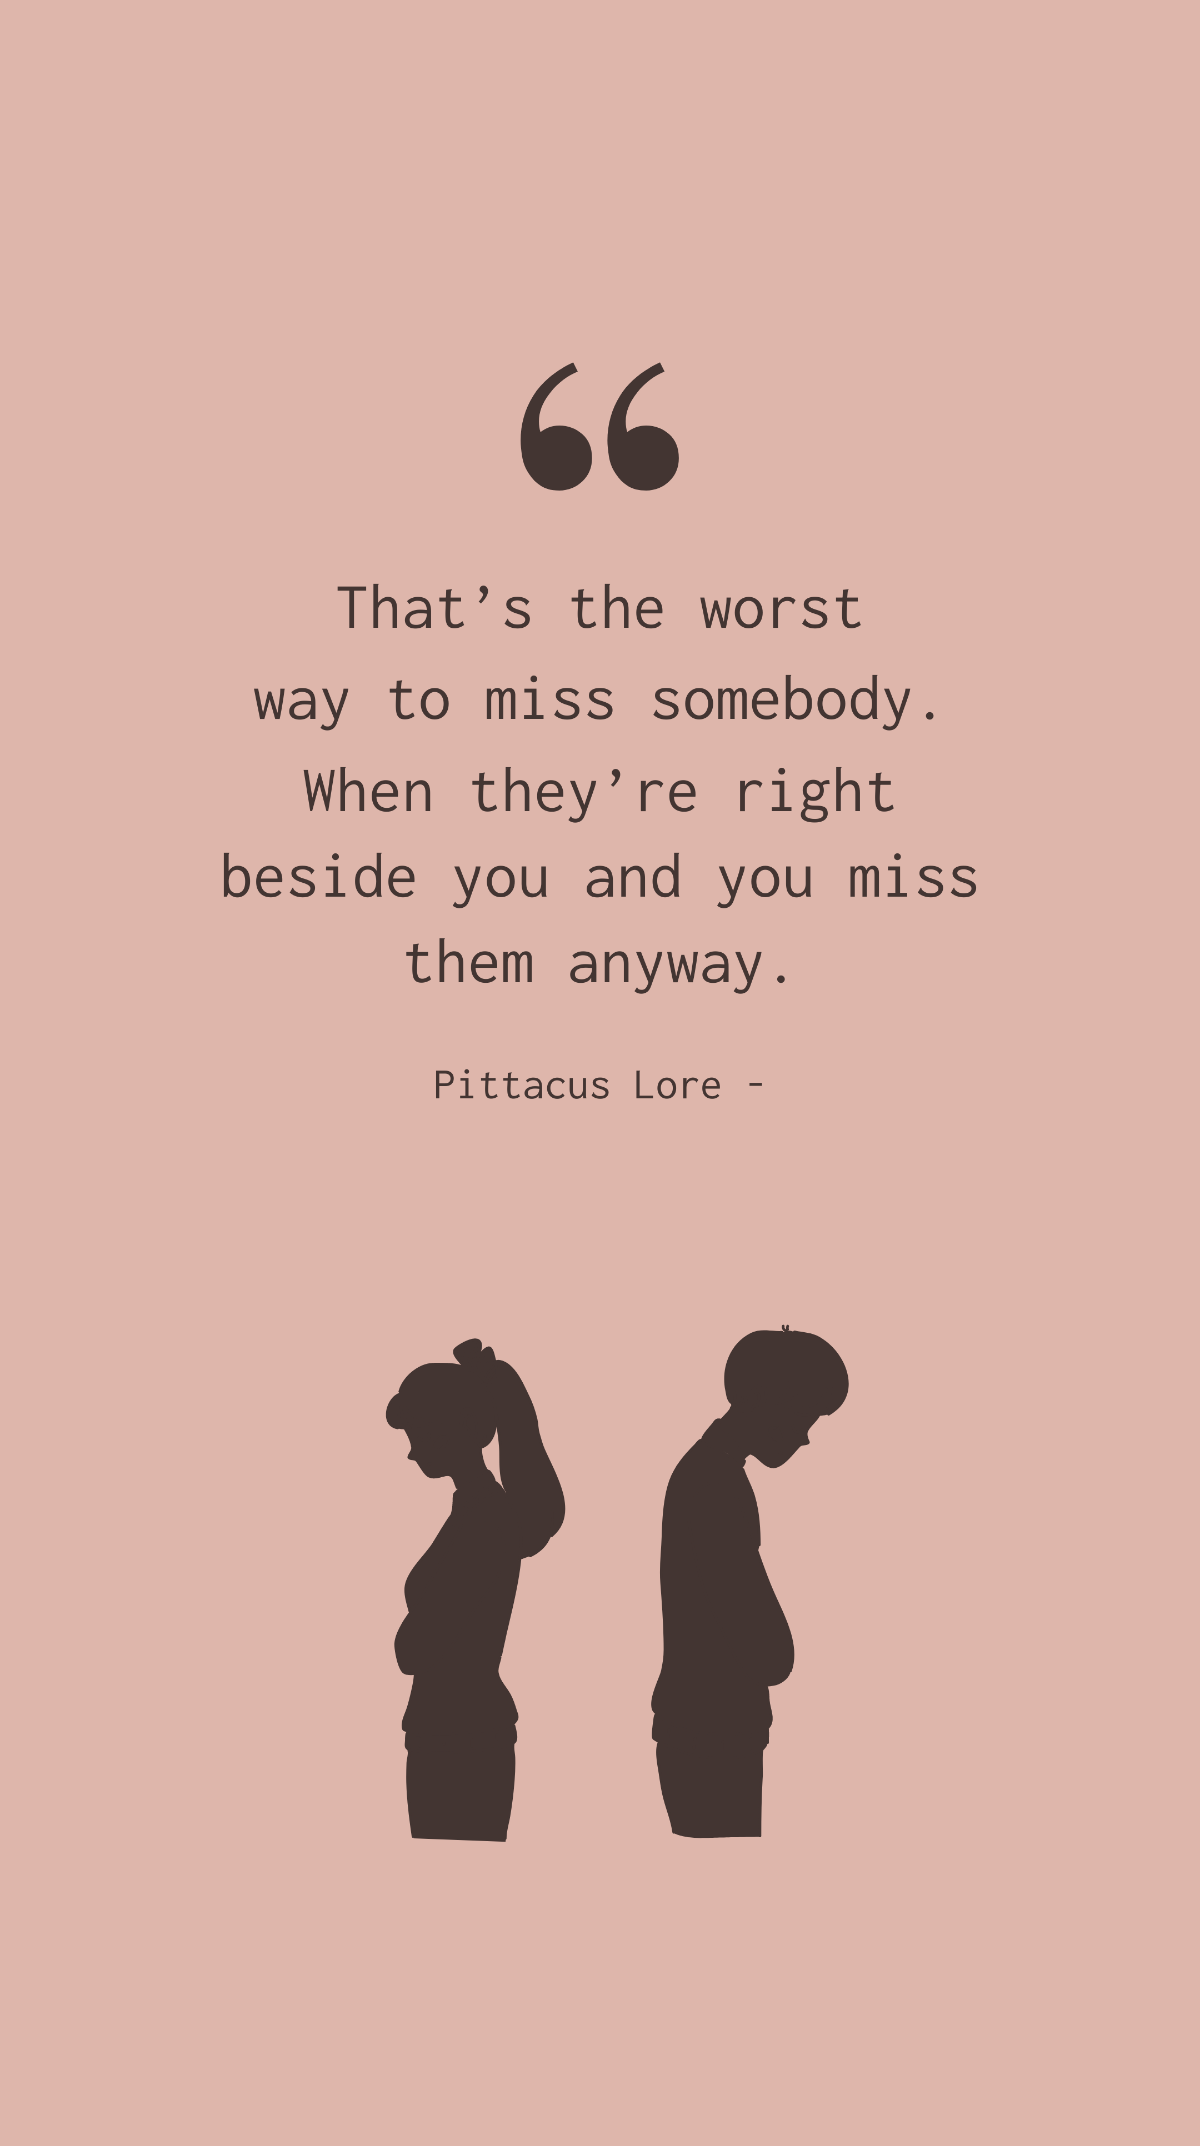 Pittacus Lore - That’s the worst way to miss somebody. When they’re right beside you and you miss them anyway.